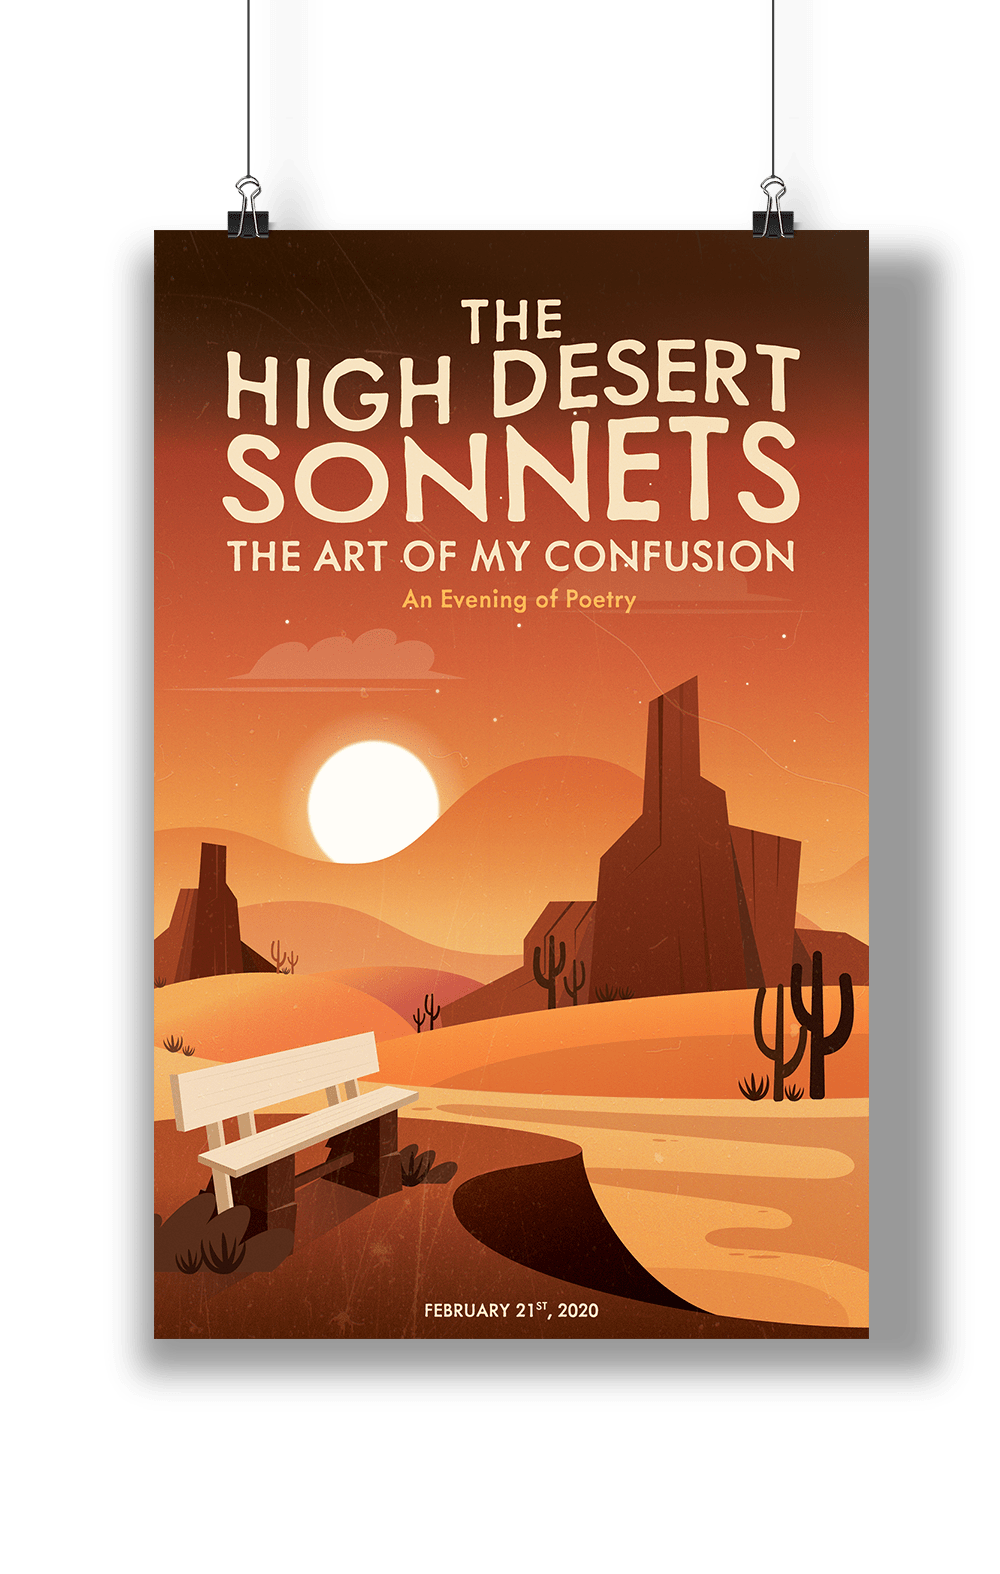 An illustrated poster of a bench on a clif in the desert.